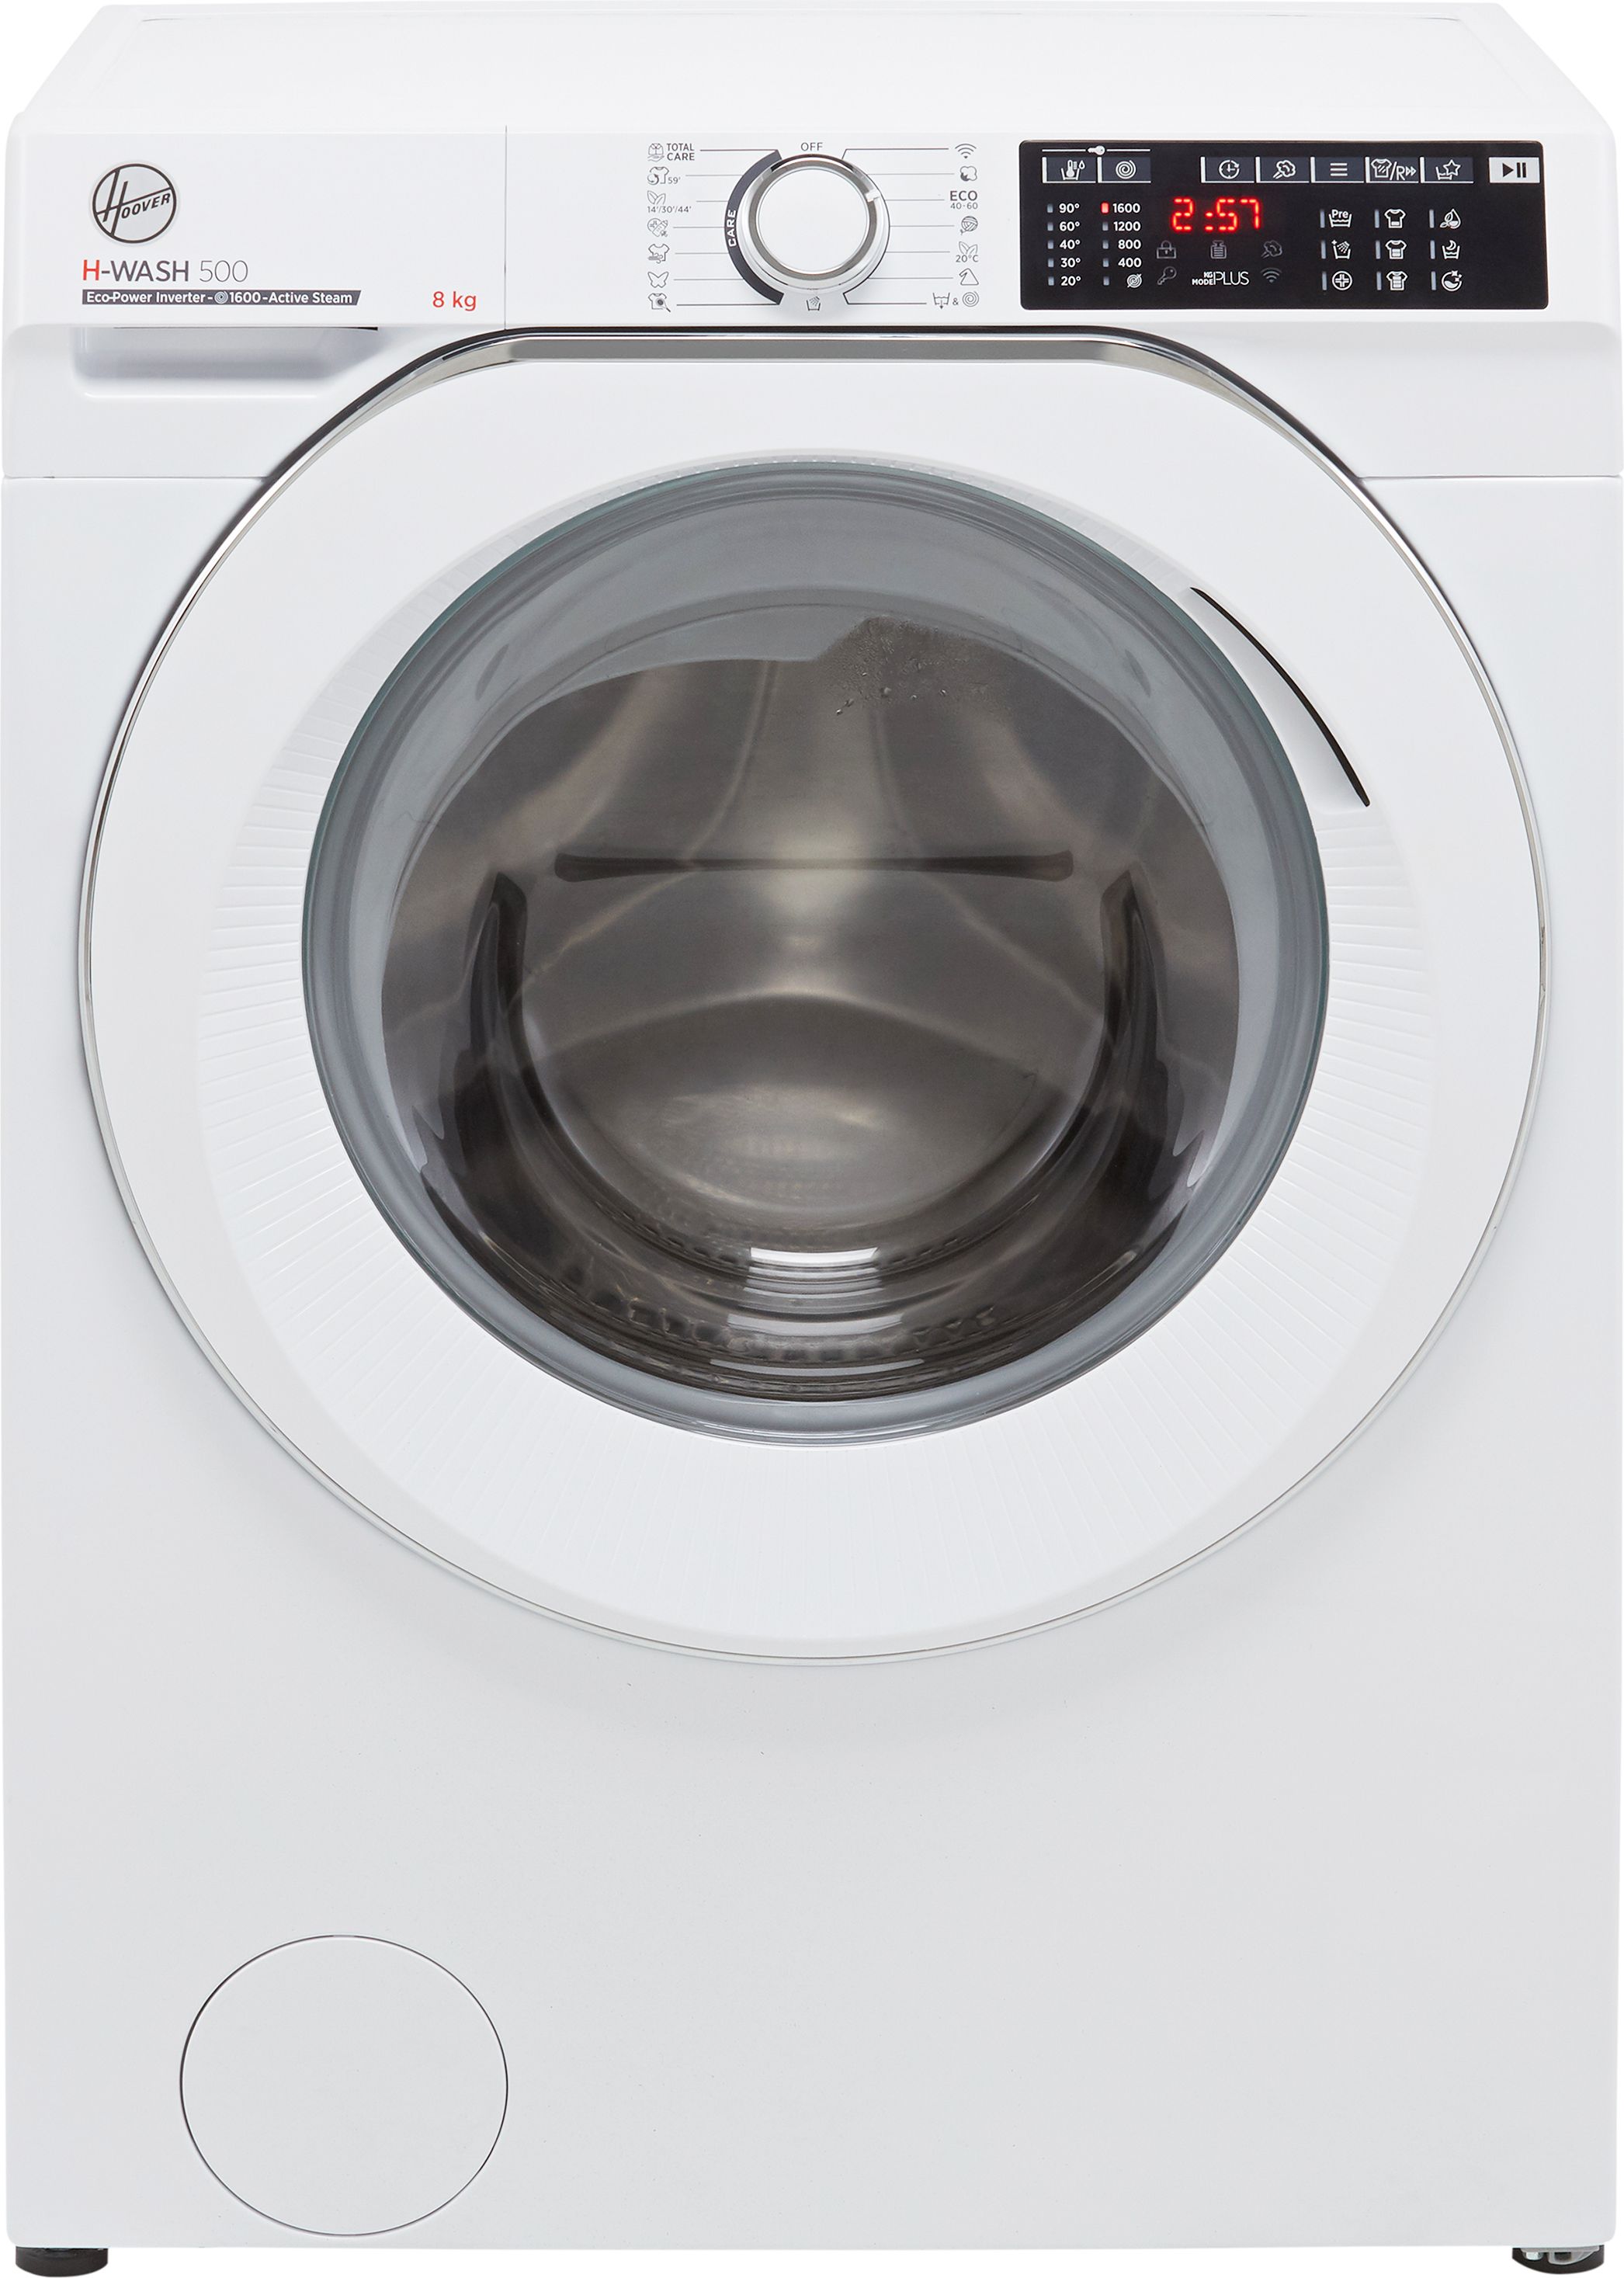 Hoover H-WASH 500 HW68AMC/1 8kg Washing Machine with 1600 rpm - White - A Rated, White